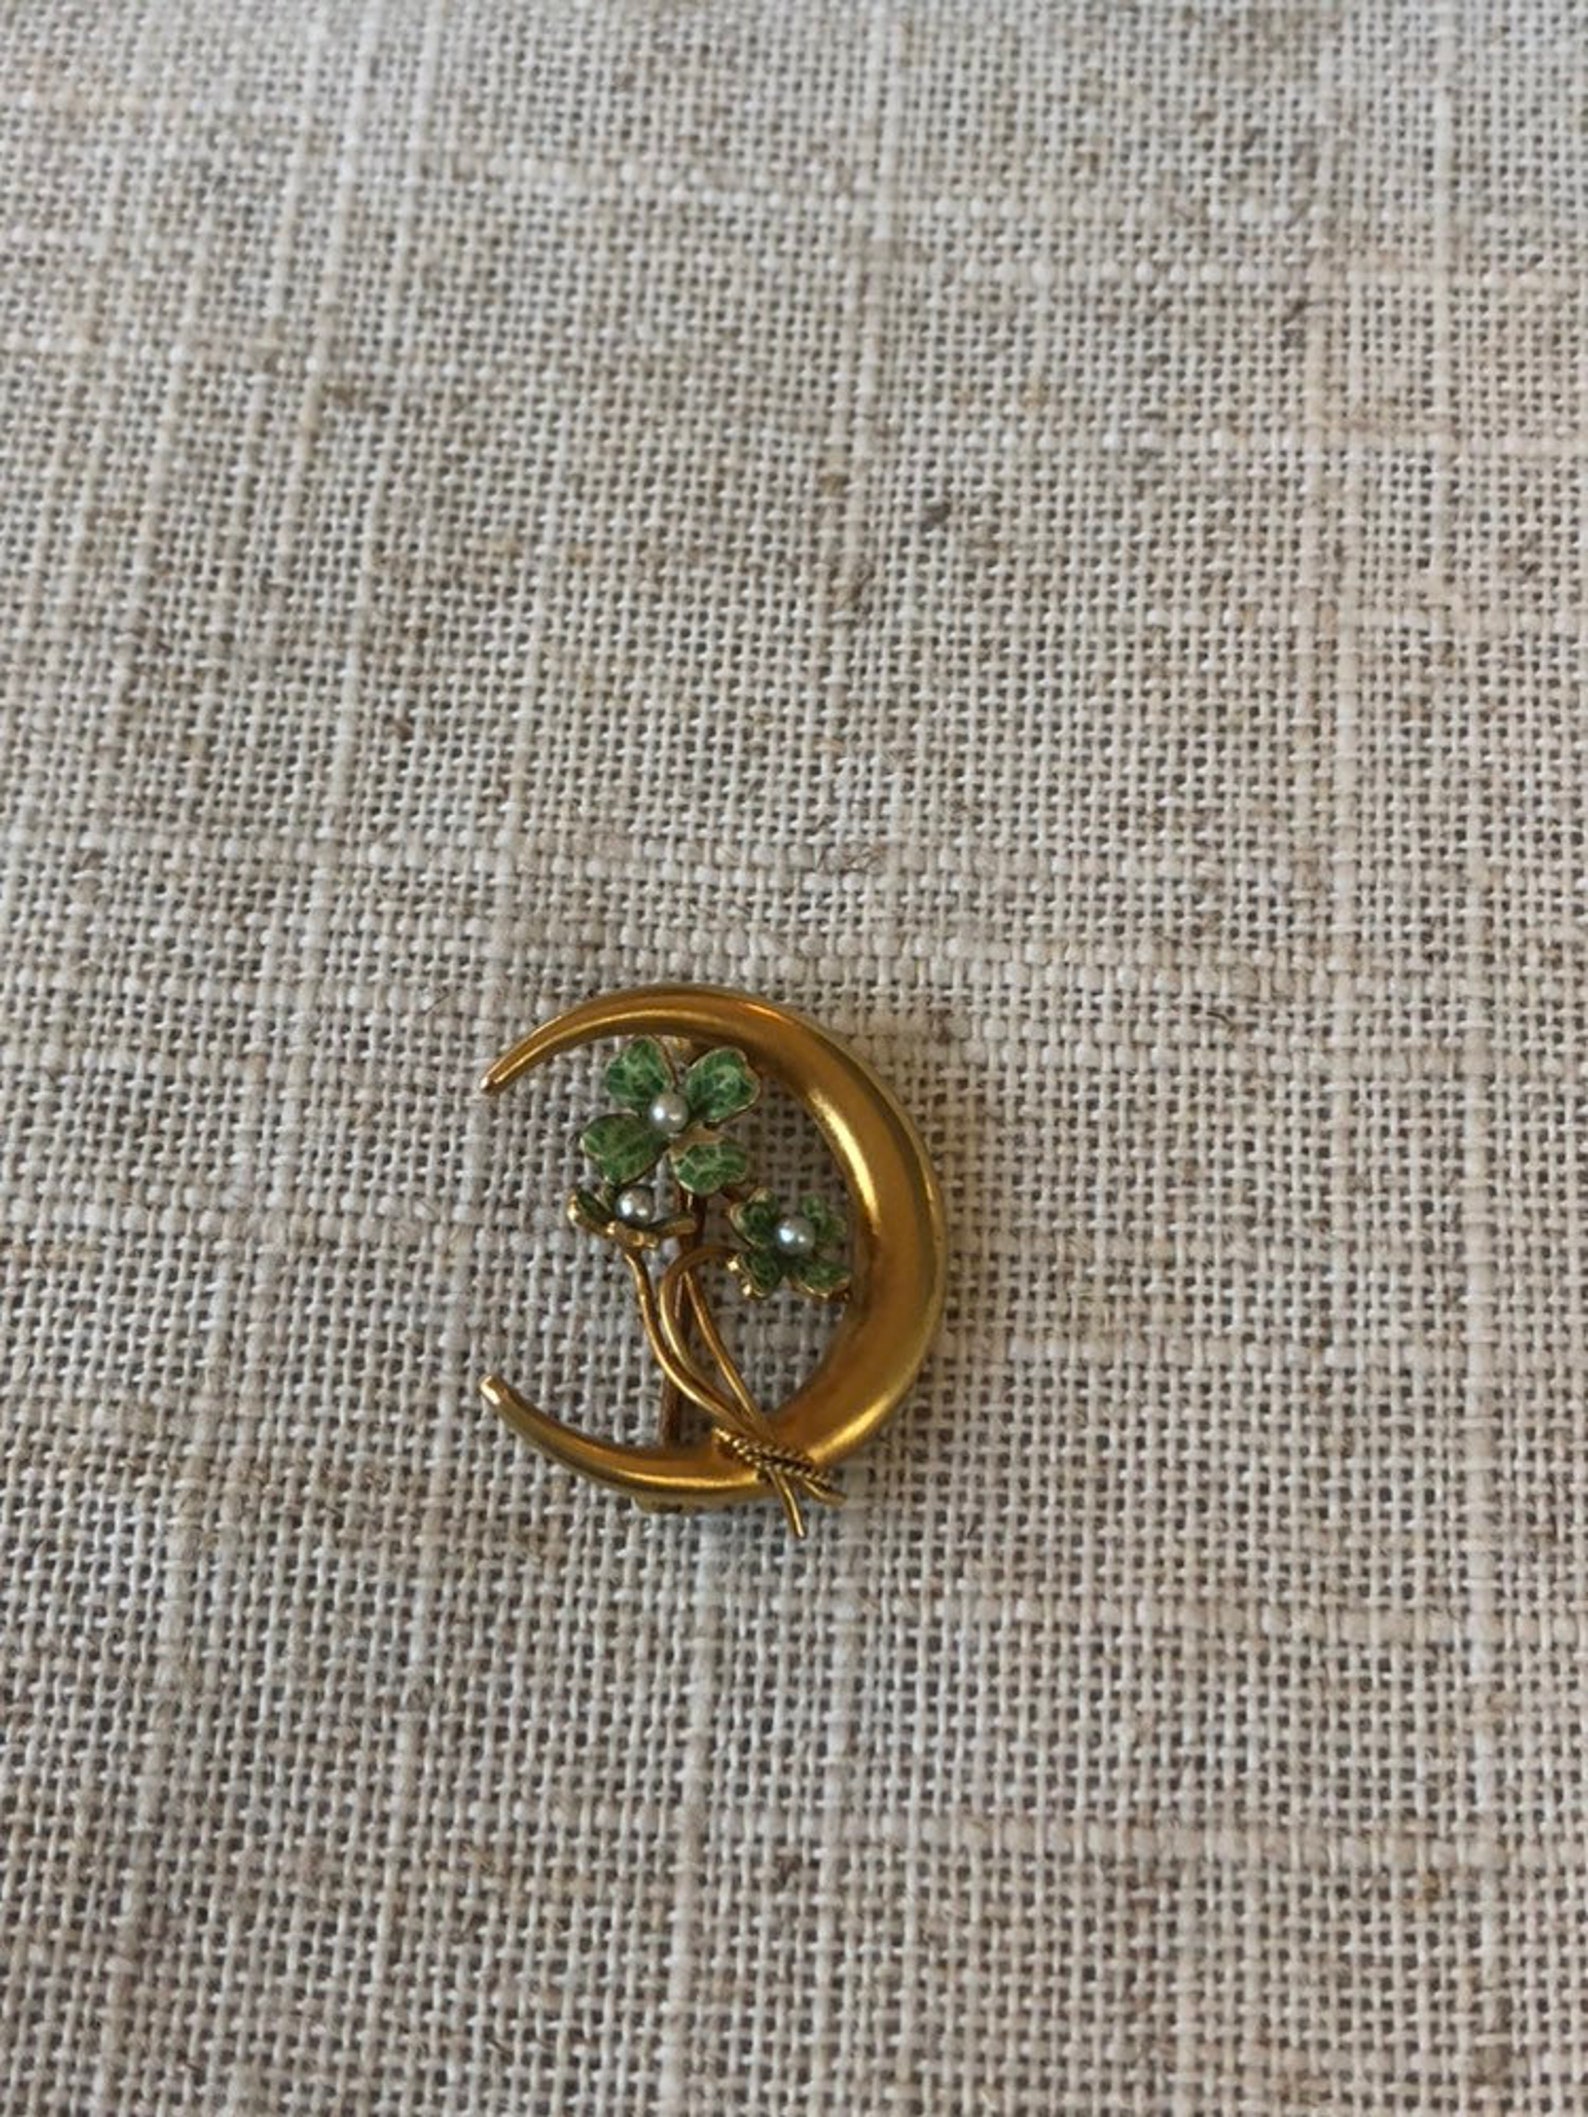 Antique 14k Gold Crescent Moon and Clover Brooch Pin - Etsy